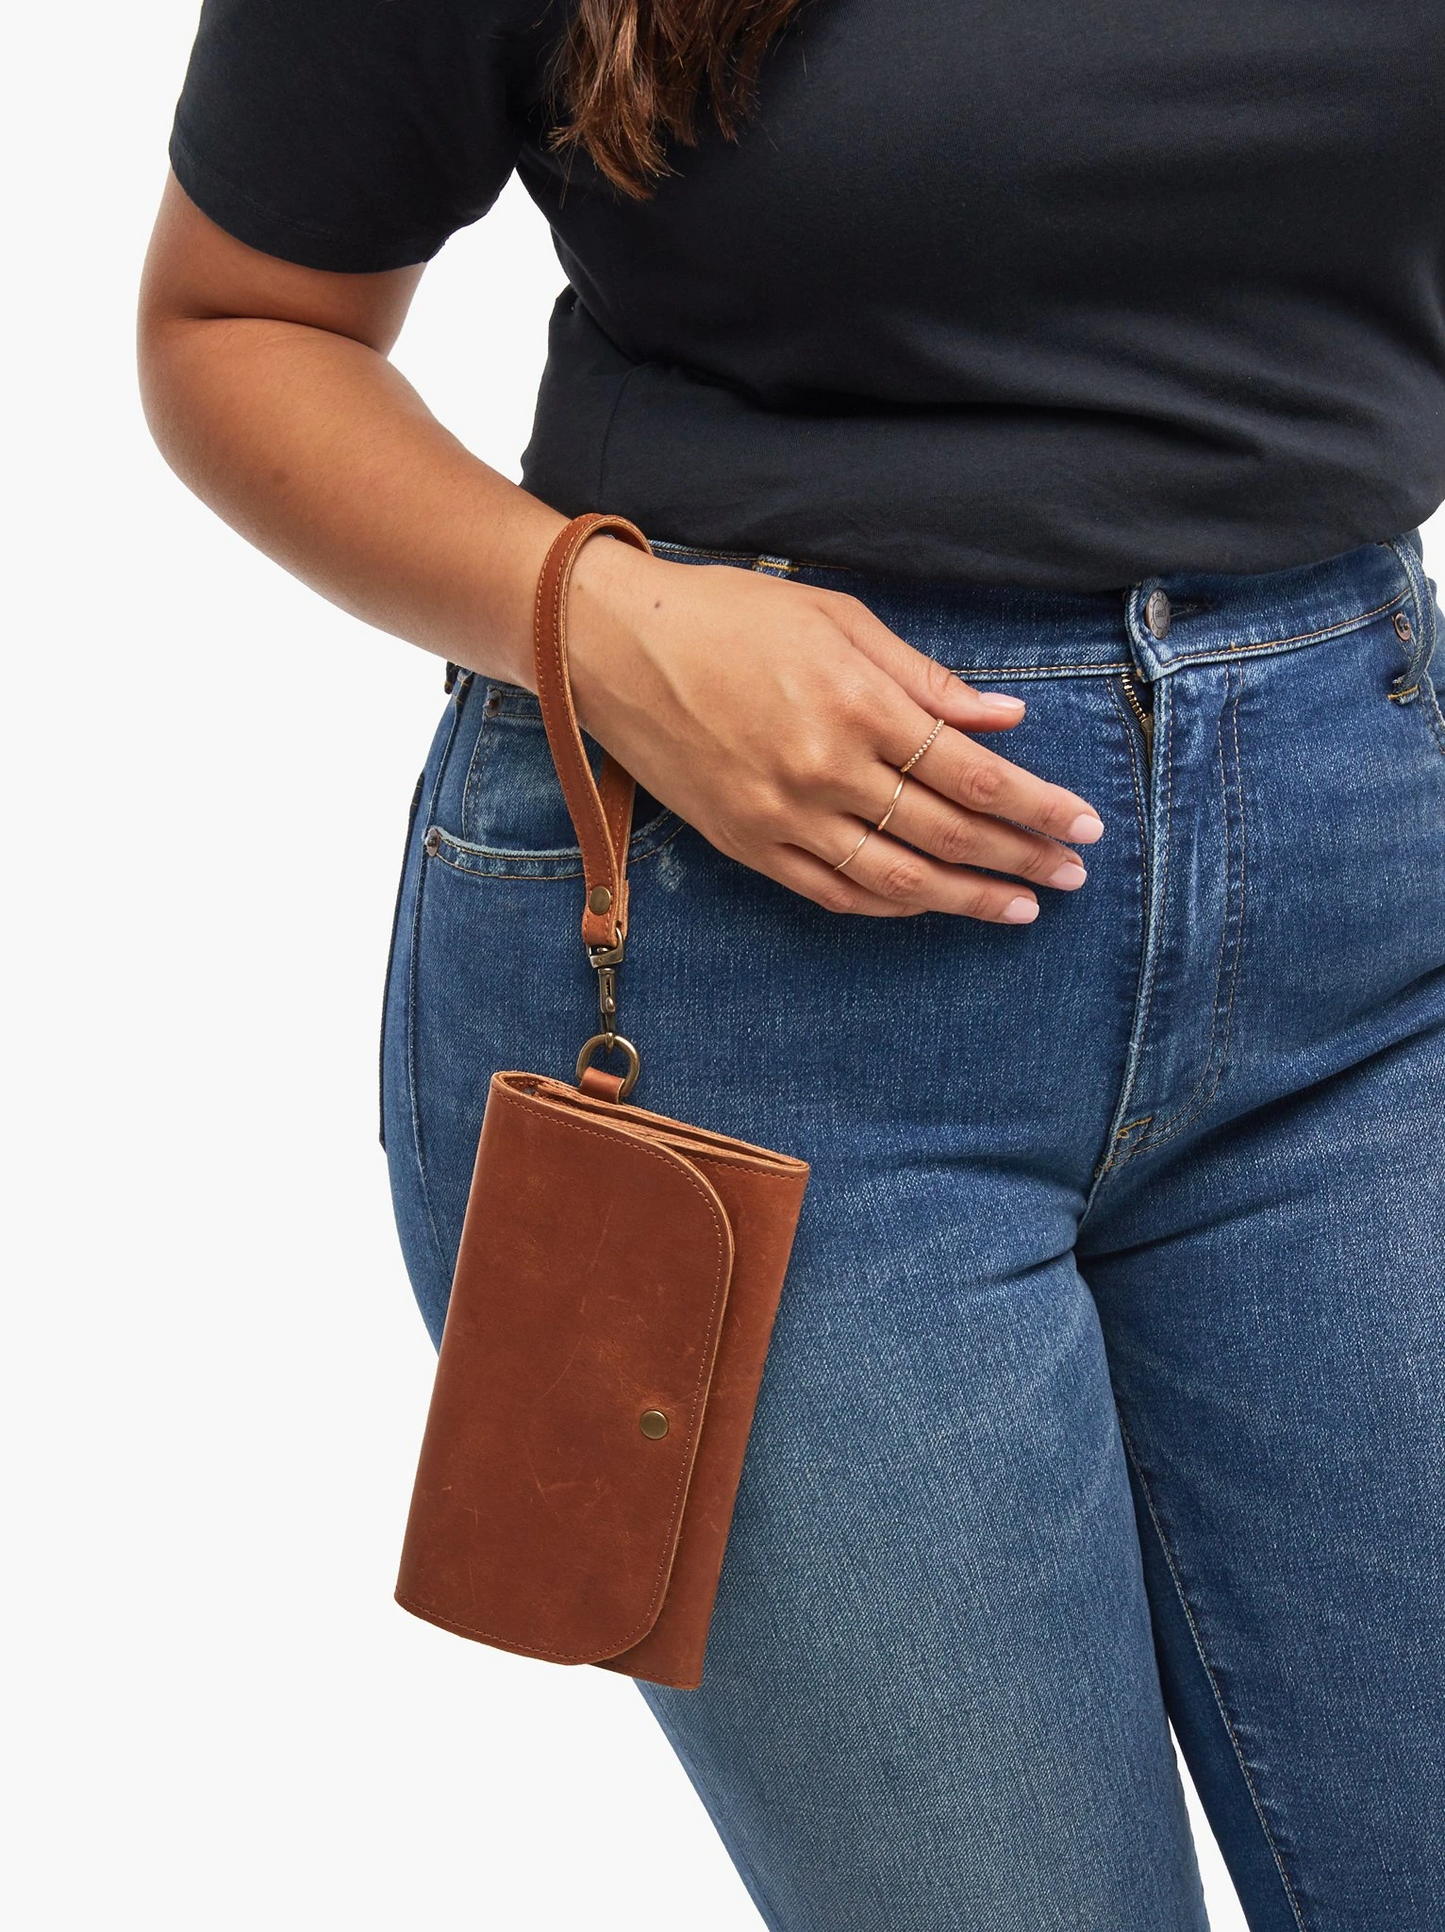 Mare Phone Wallet in Whiskey